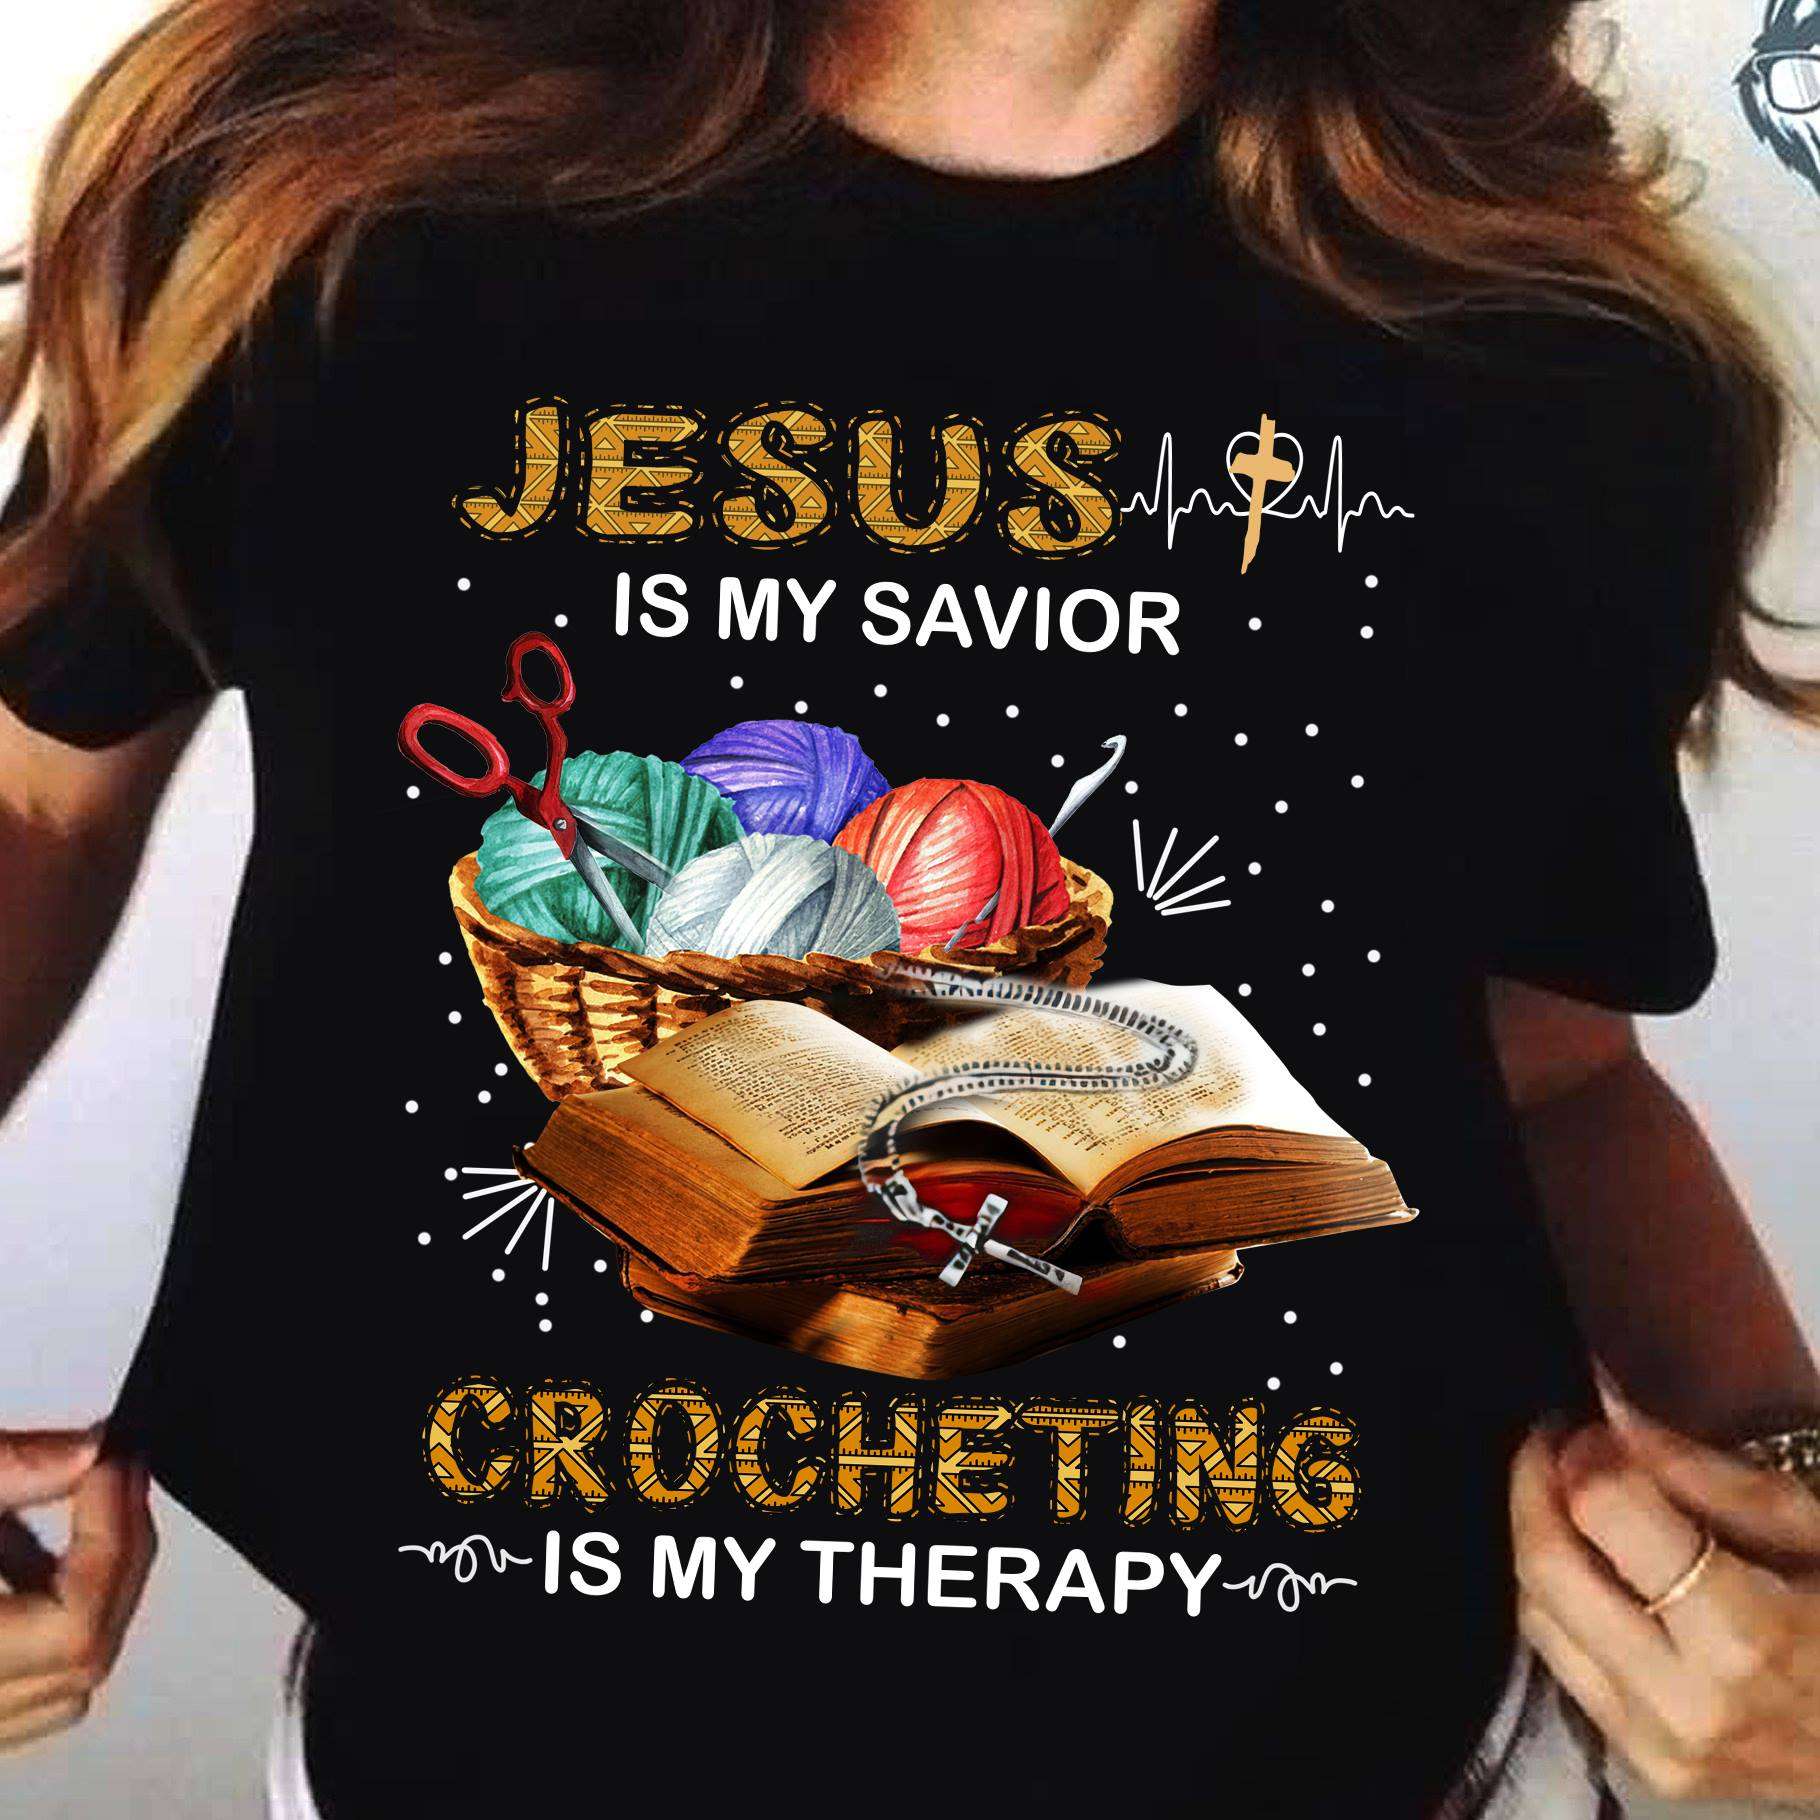 Jesus is my savior crocheting is my therapy - Crocheting and Jesus